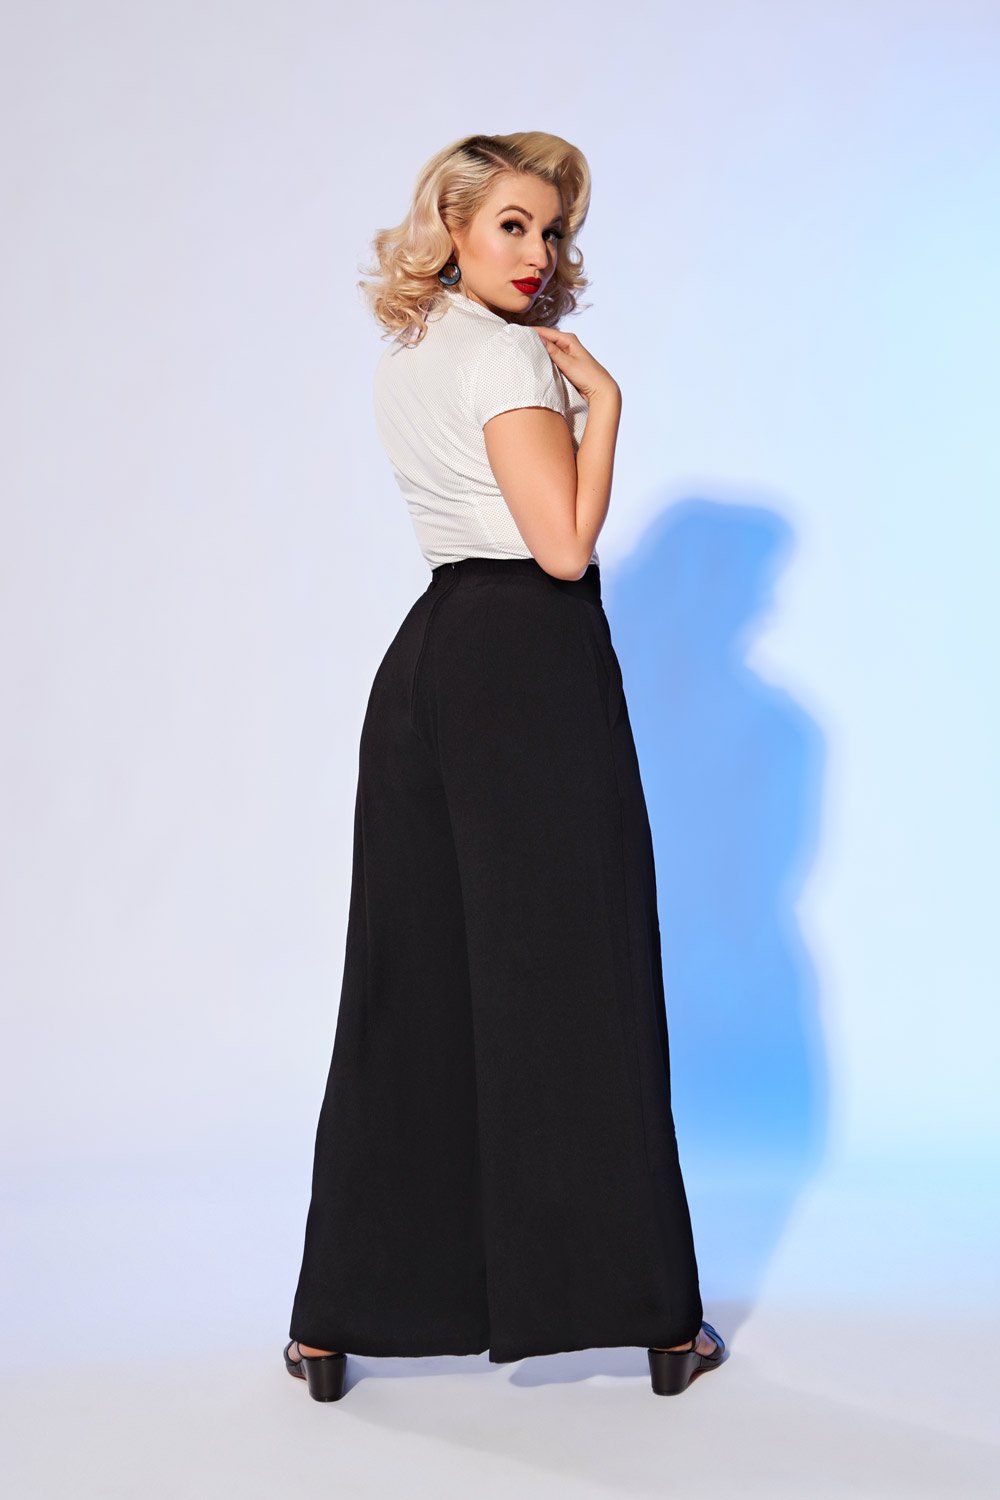 Pinup Girl Clothing favorite Dietrich vintage inspired wide leg trouser palazzo pants with pockets made of high quality stretch crepe in black 30" inch inseam